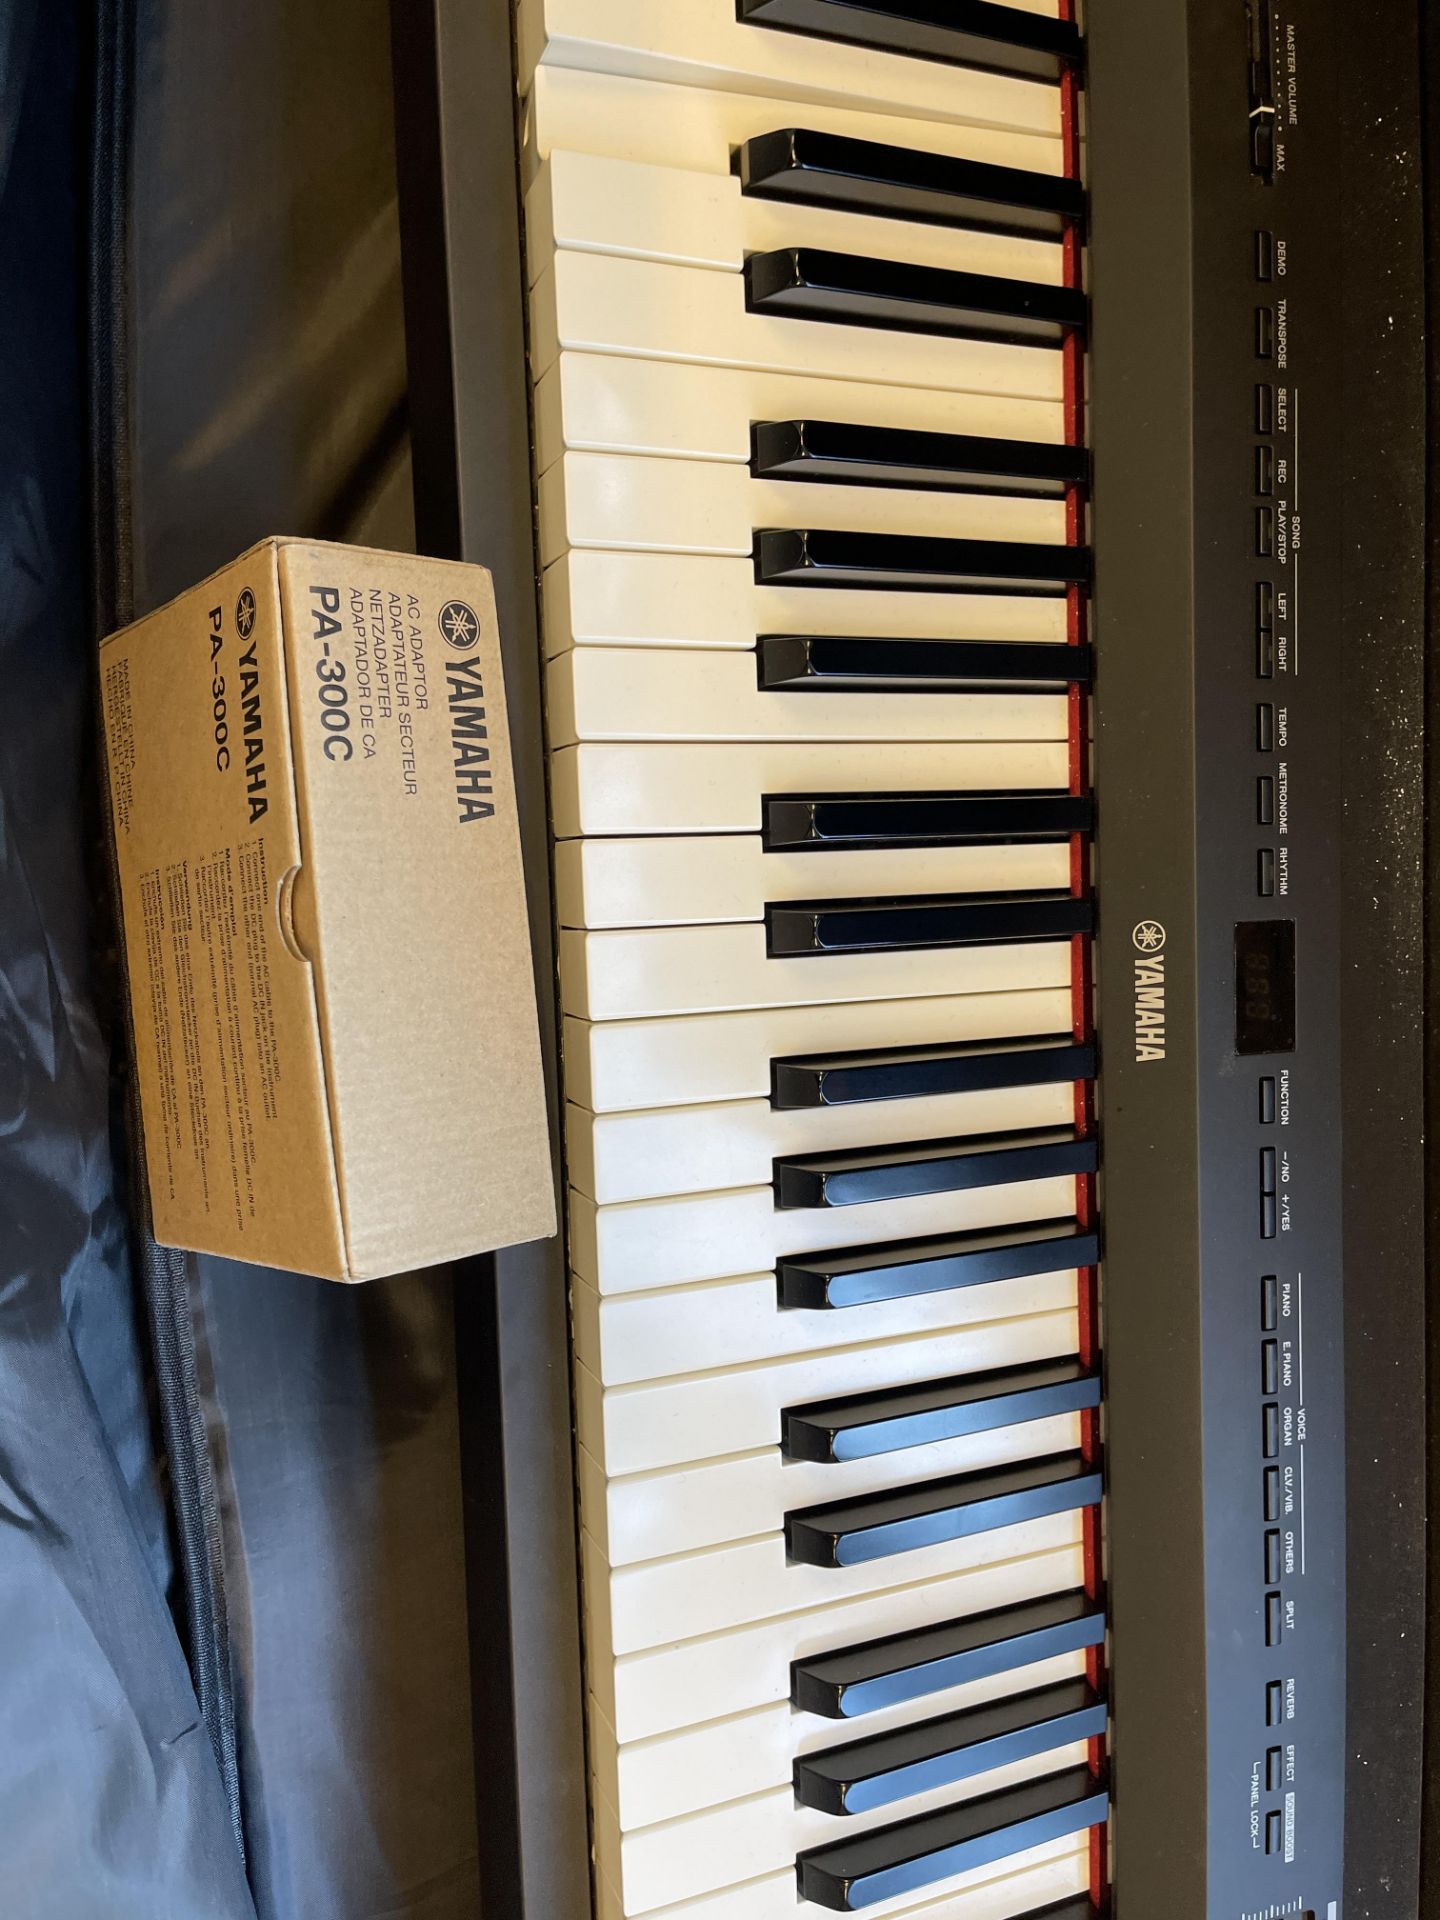 Yamaha P-255B Digital Piano Complete with Charger, M Gear Pedal and Case - Image 13 of 13